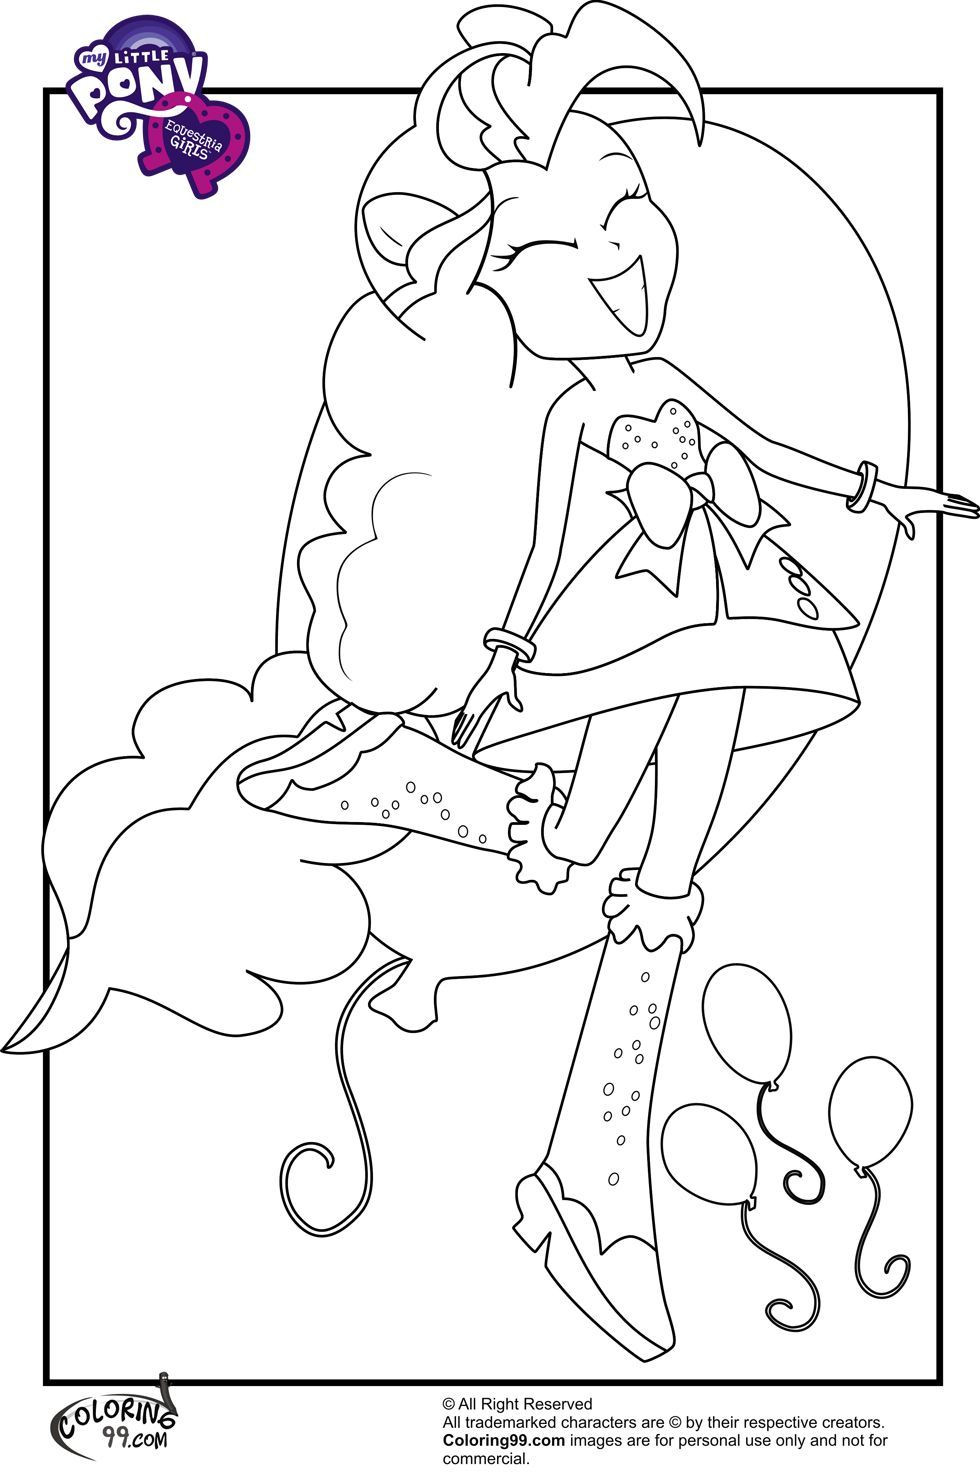 Equestria Girls Rarity Coloring Pages
 my little pony equestria girls coloring pages